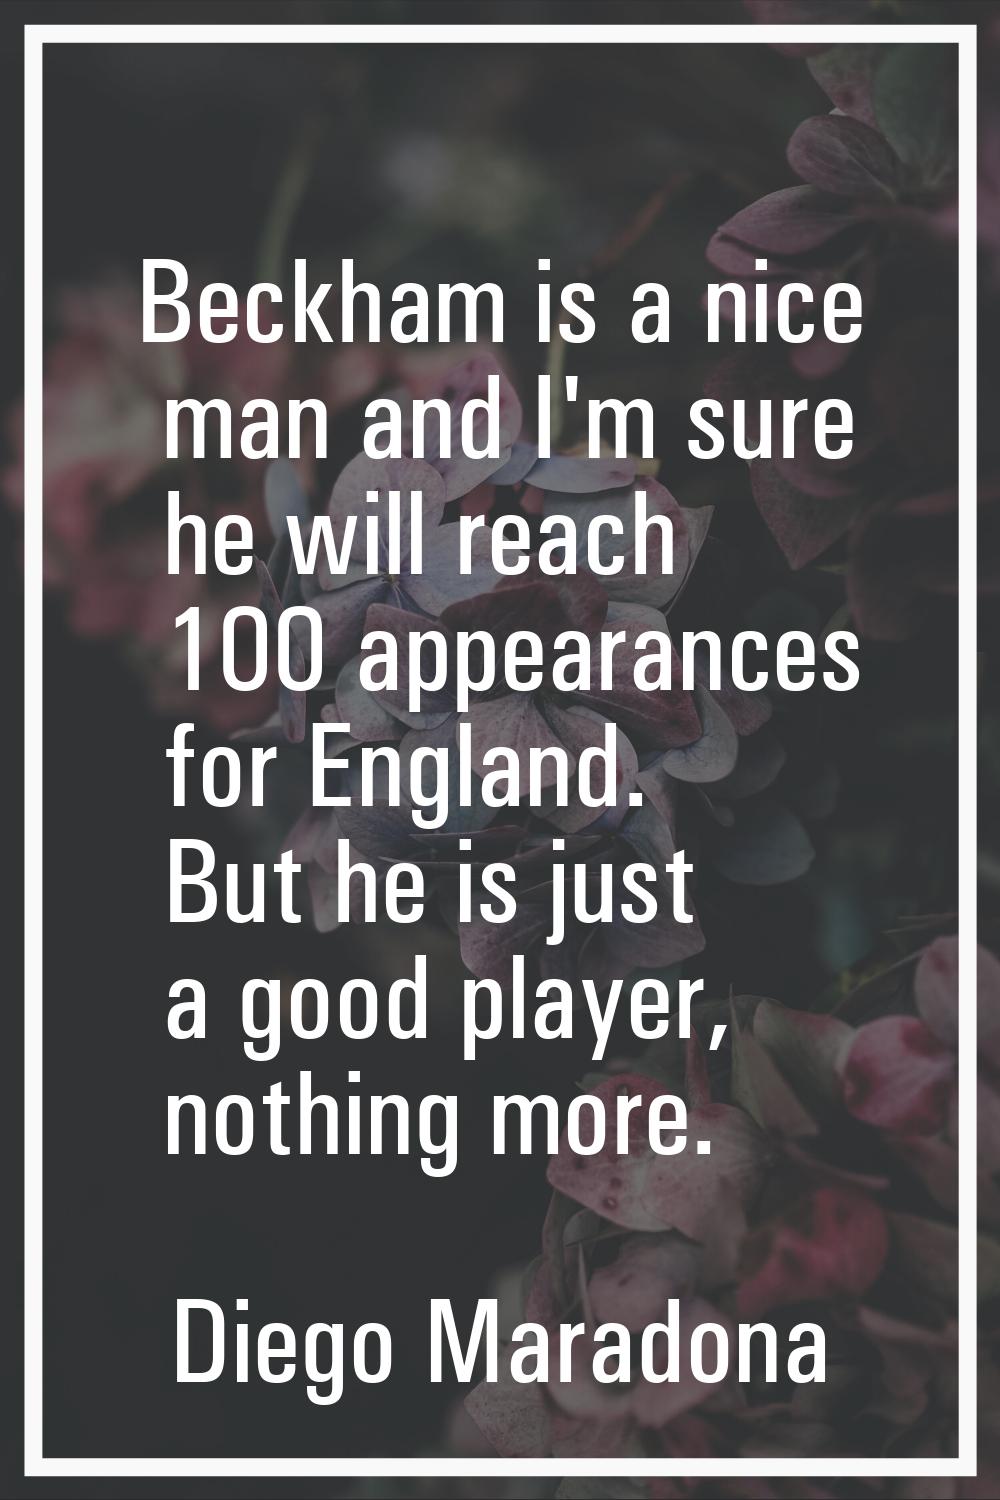 Beckham is a nice man and I'm sure he will reach 100 appearances for England. But he is just a good